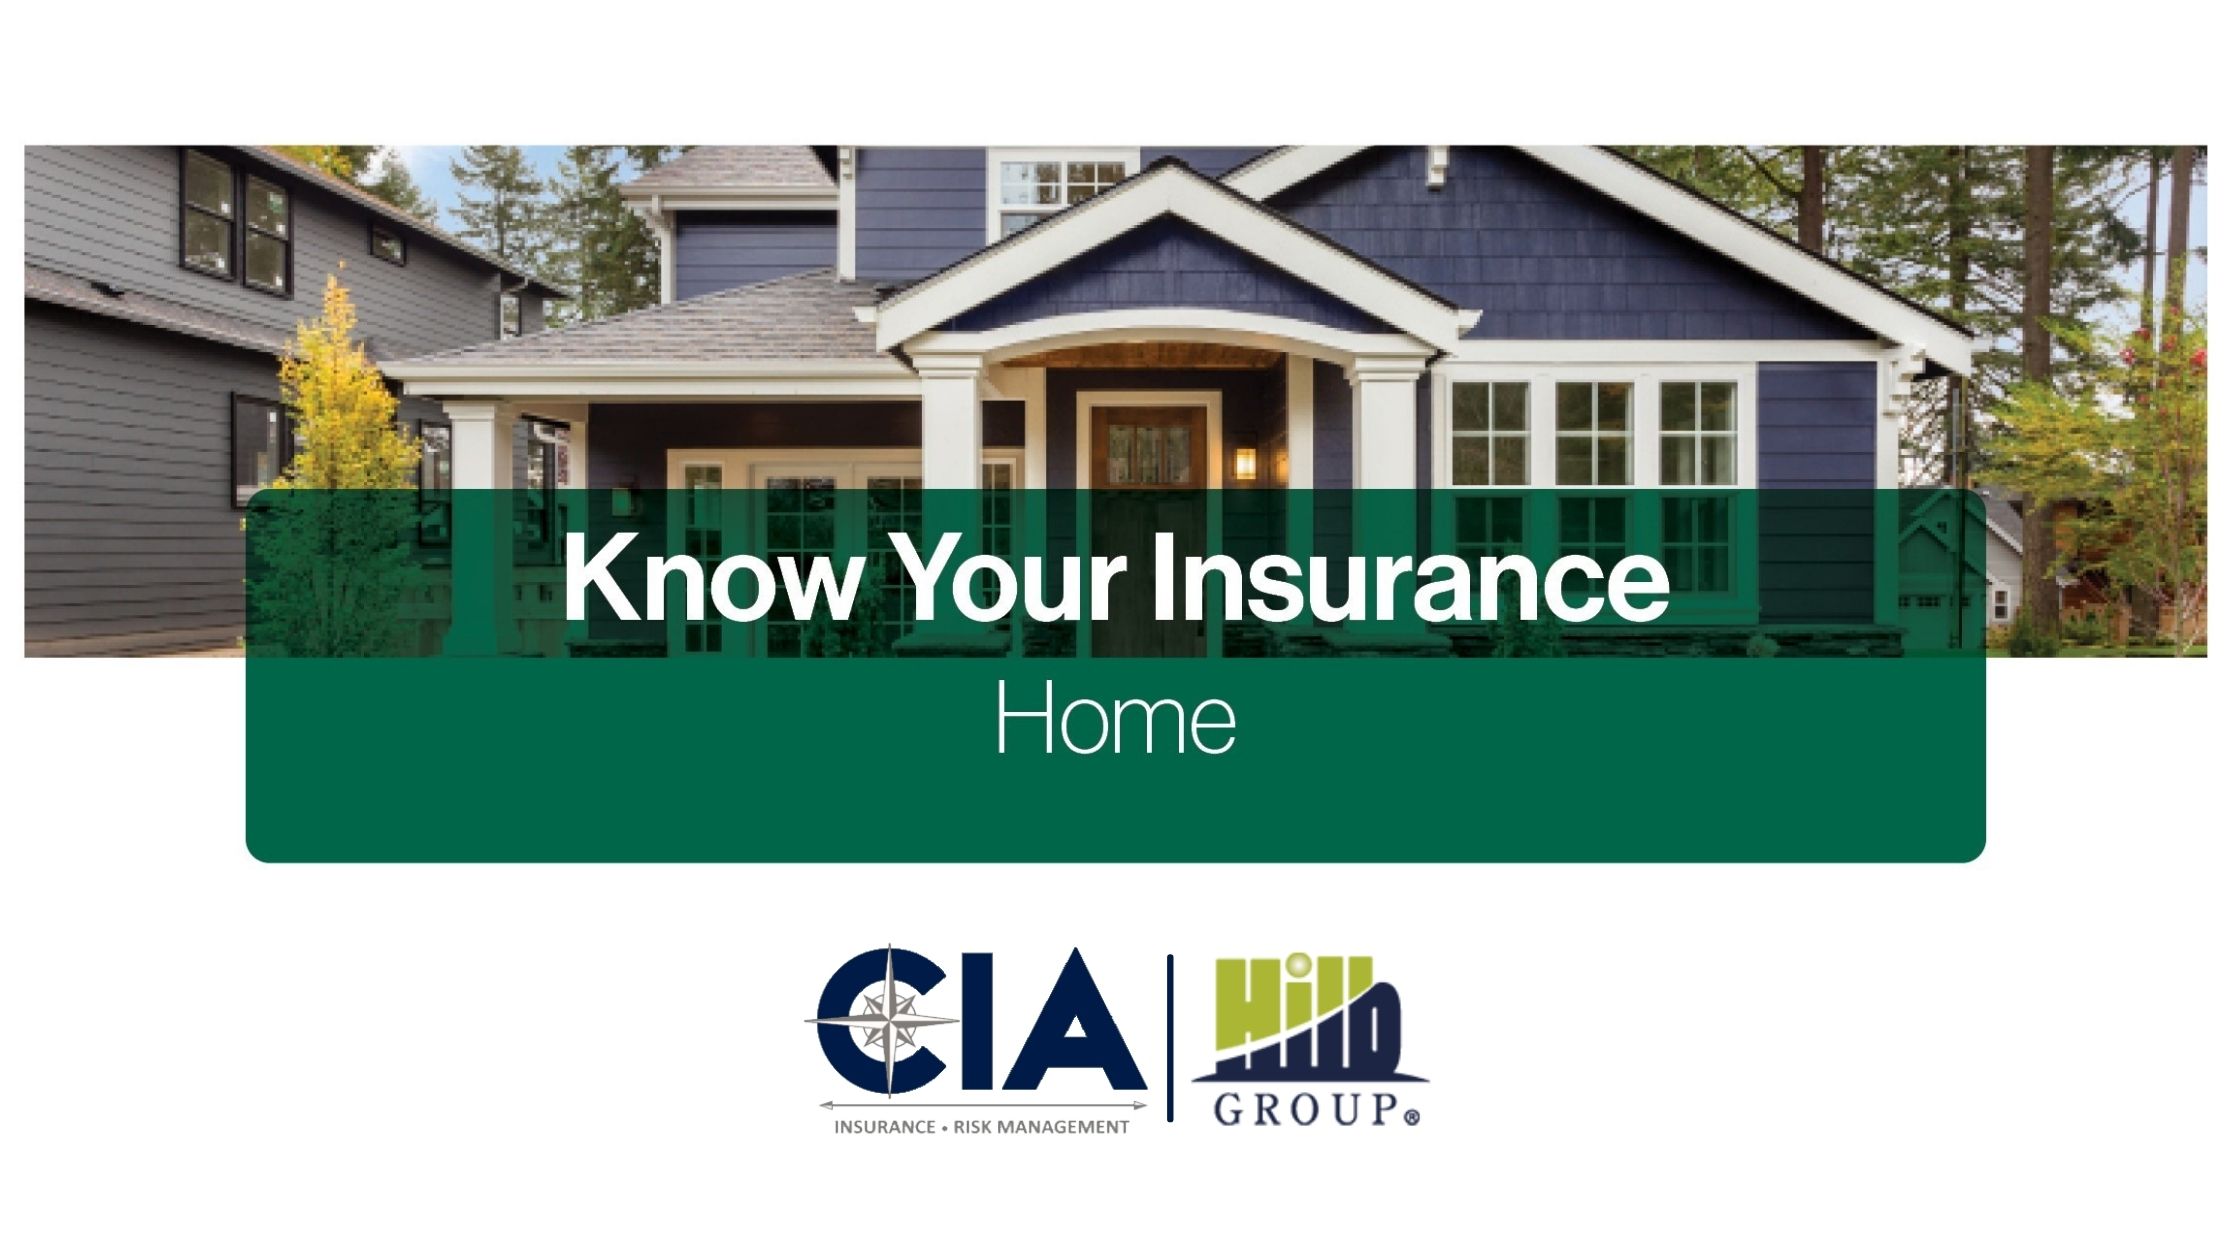 How to Avoid Underinsuring Your Home